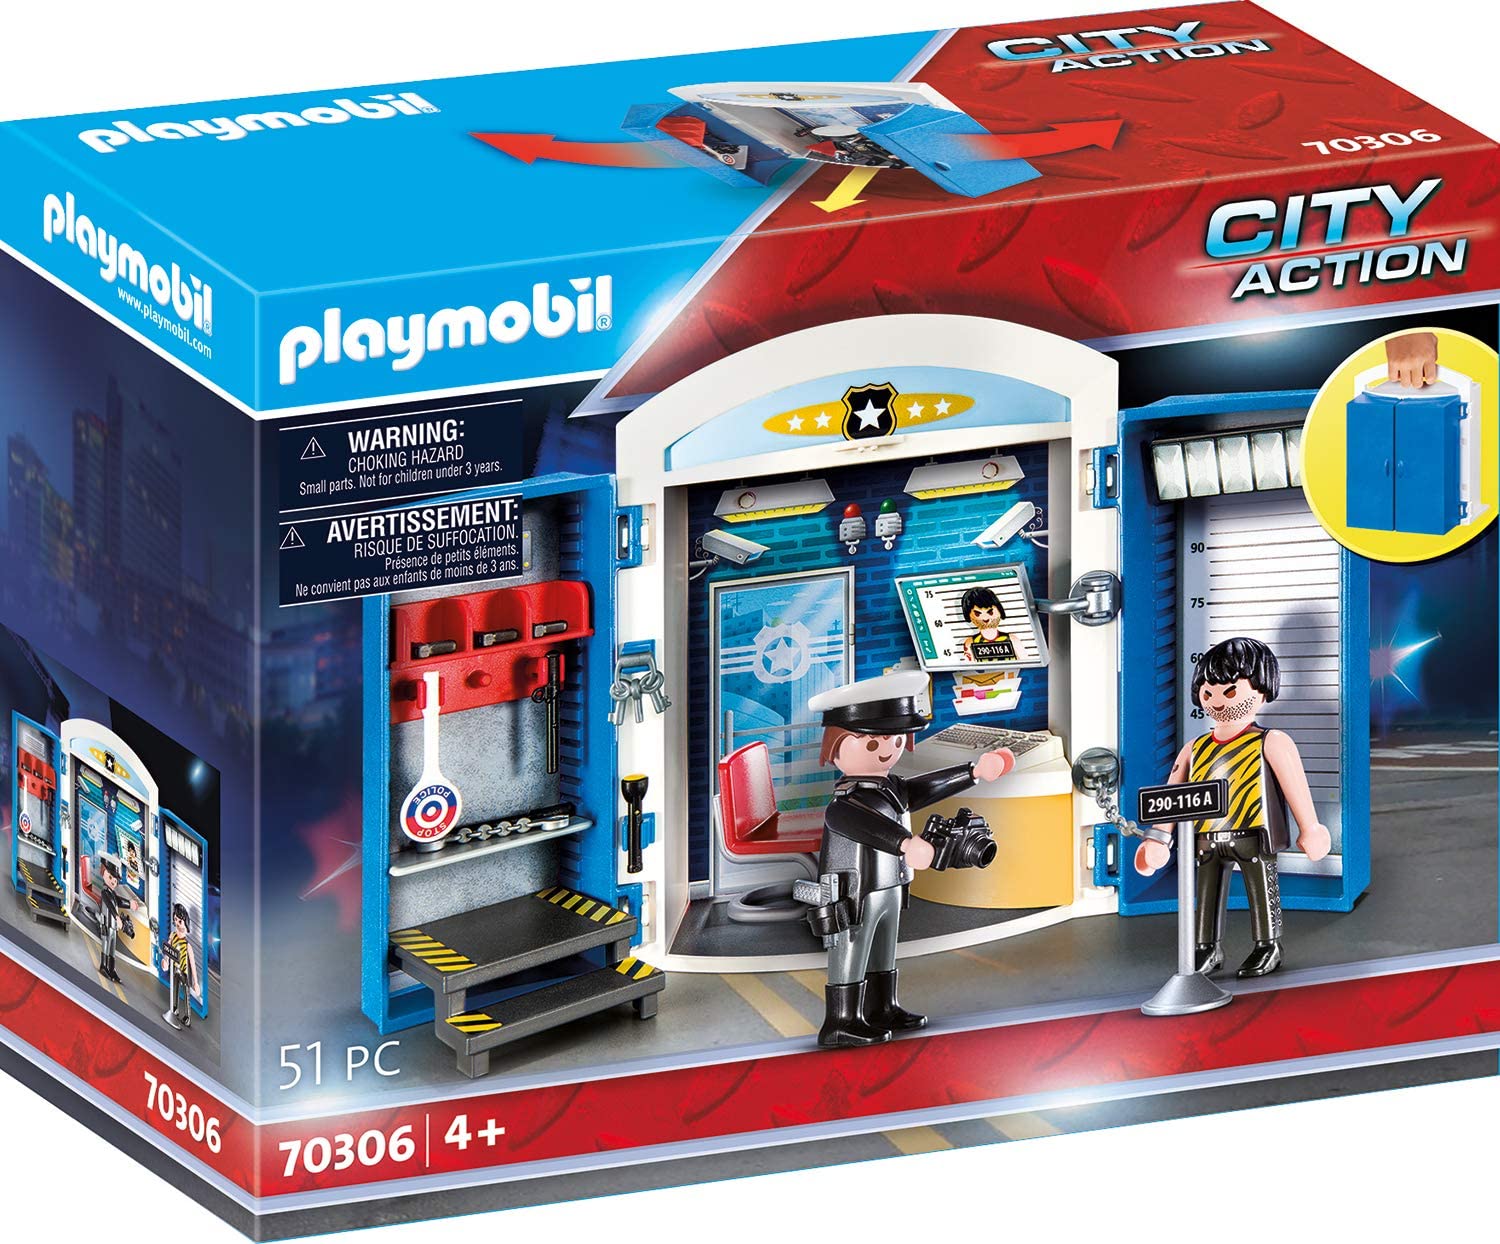 Playmobil City Action Playbox From 4 Years